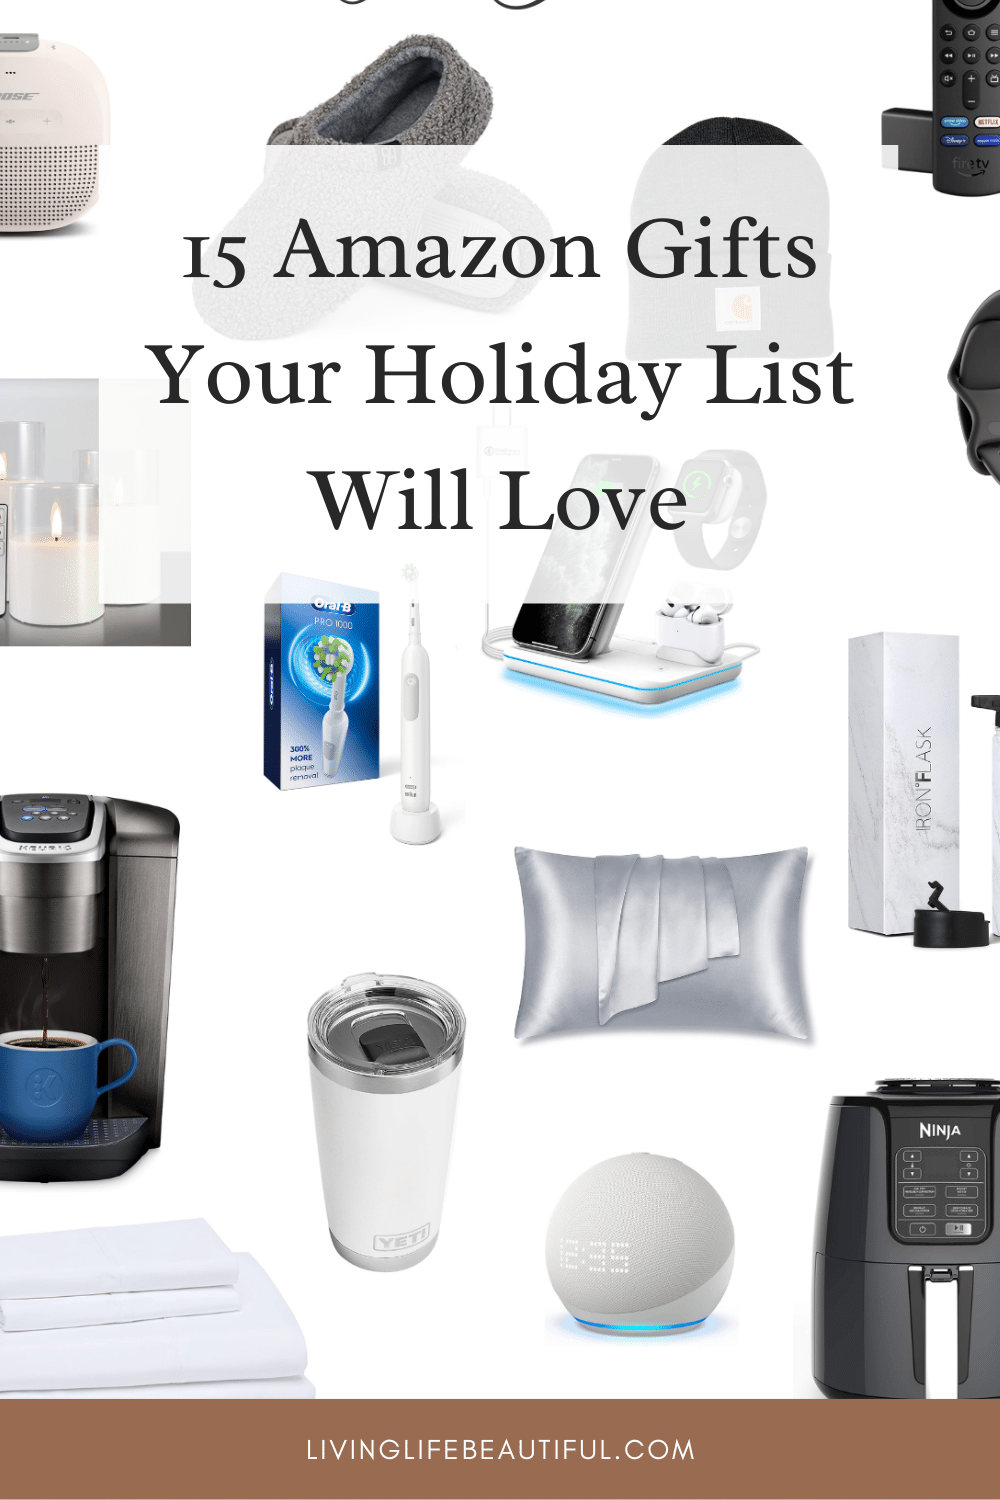 15 Amazon Gifts Your Holiday List Will Love